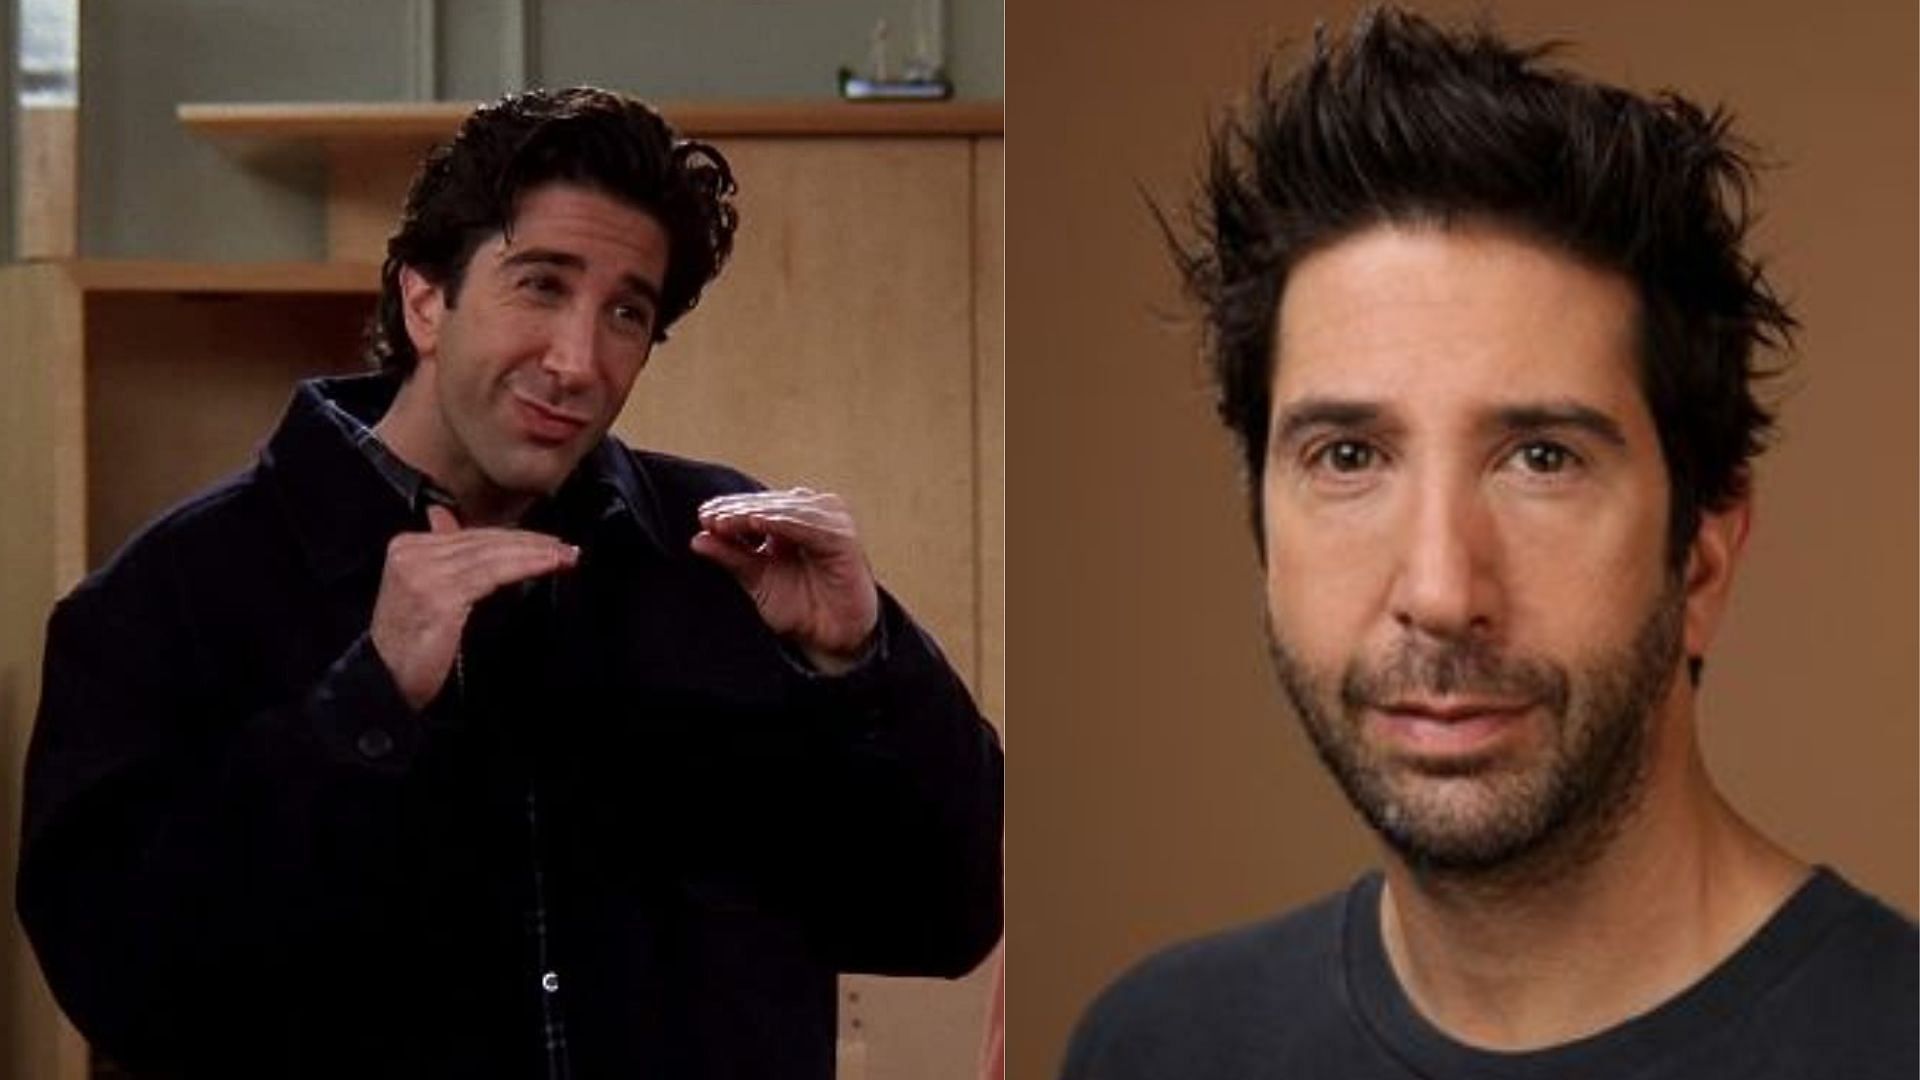 David Schwimmer, then and now (Images via IMDB and Pinterest)